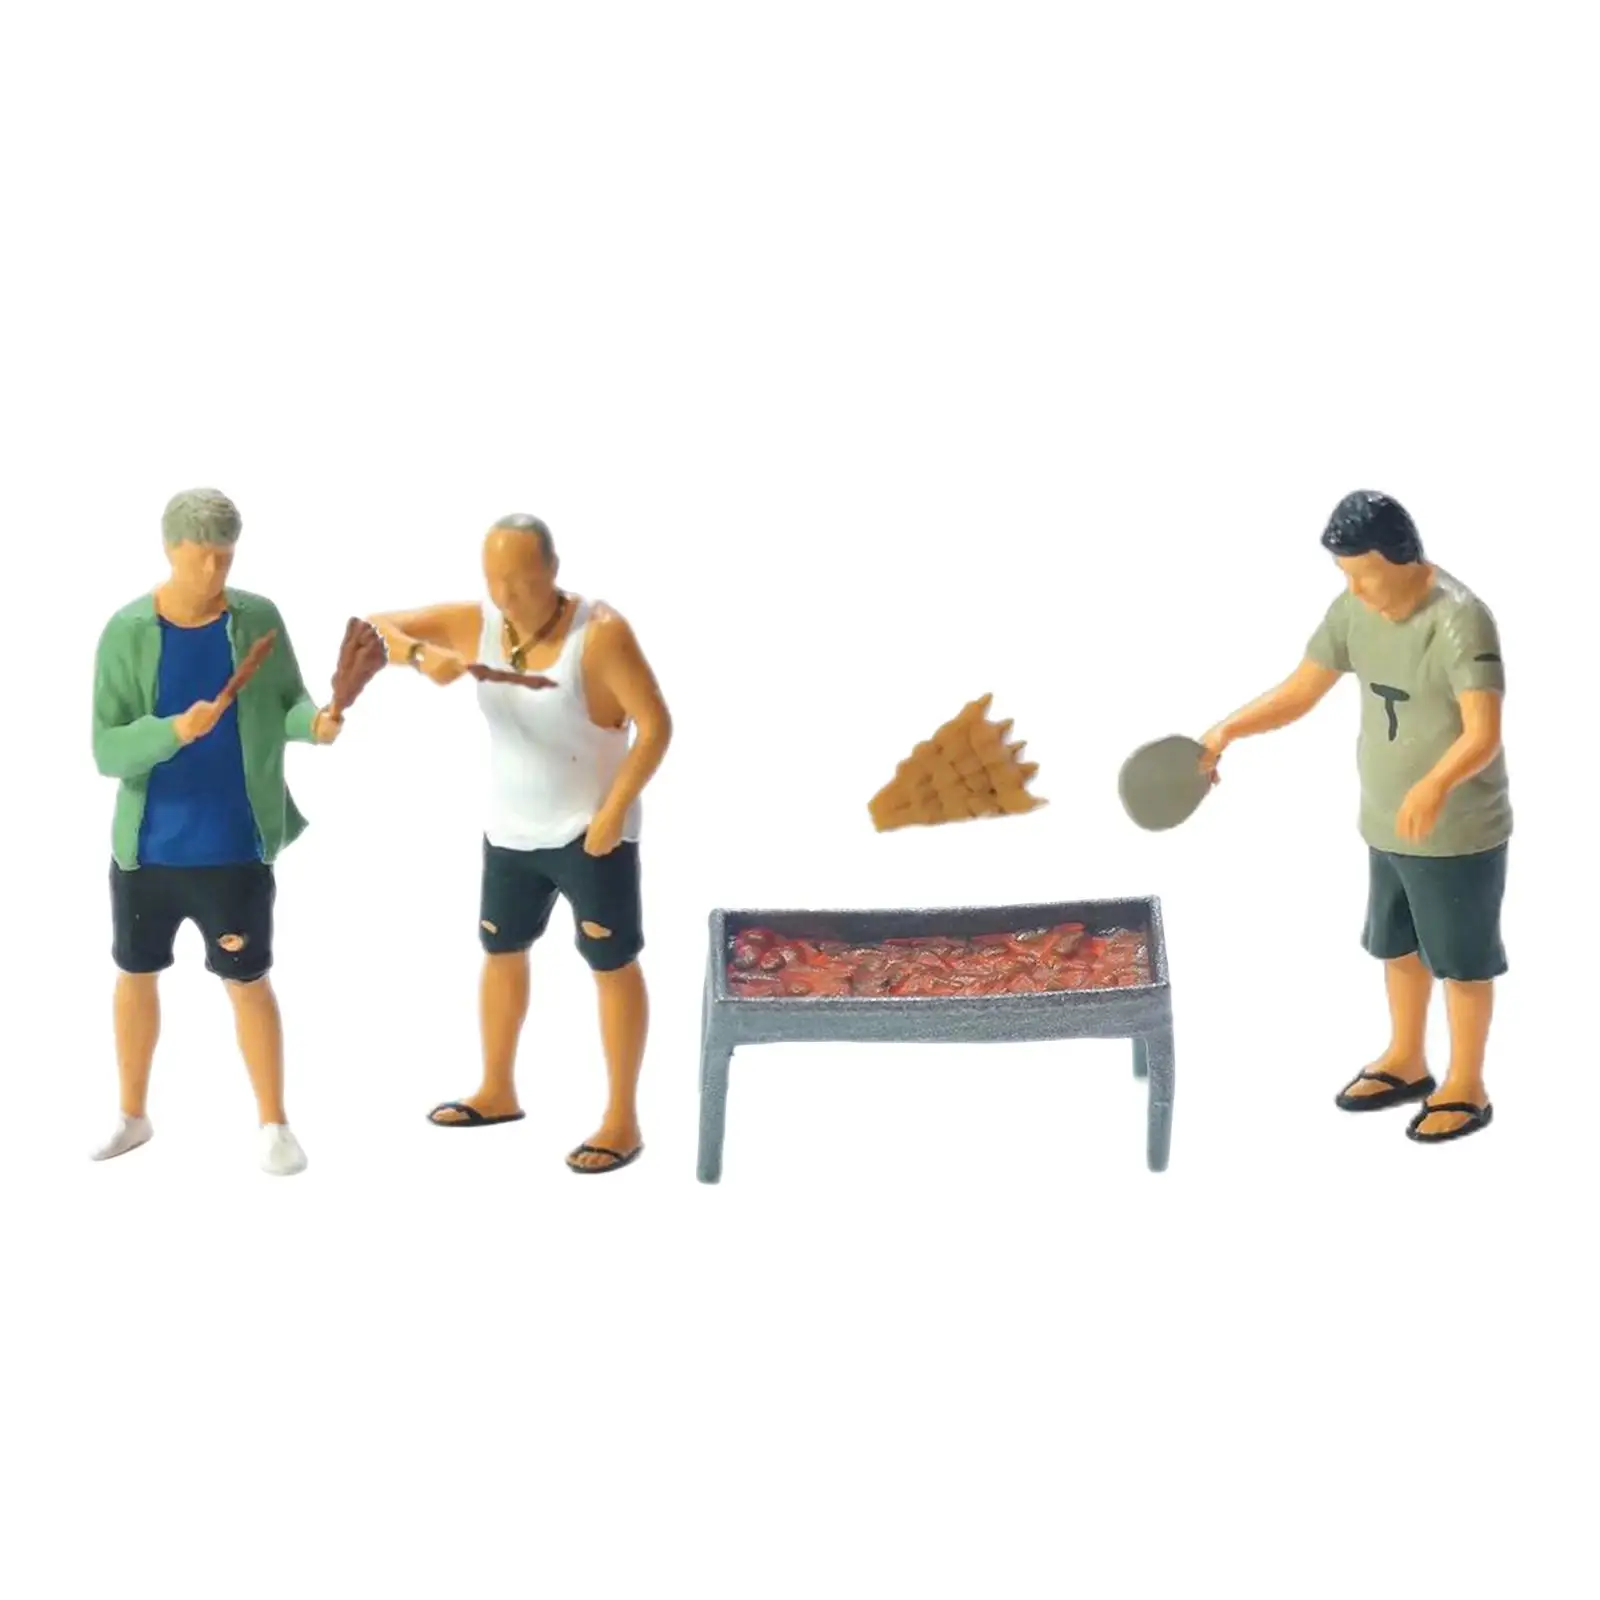 5x 1/64 BBQ People Figures Set Movie Props Layout Decoration with Accessories Desktop Ornament Resin Figurines Decoration